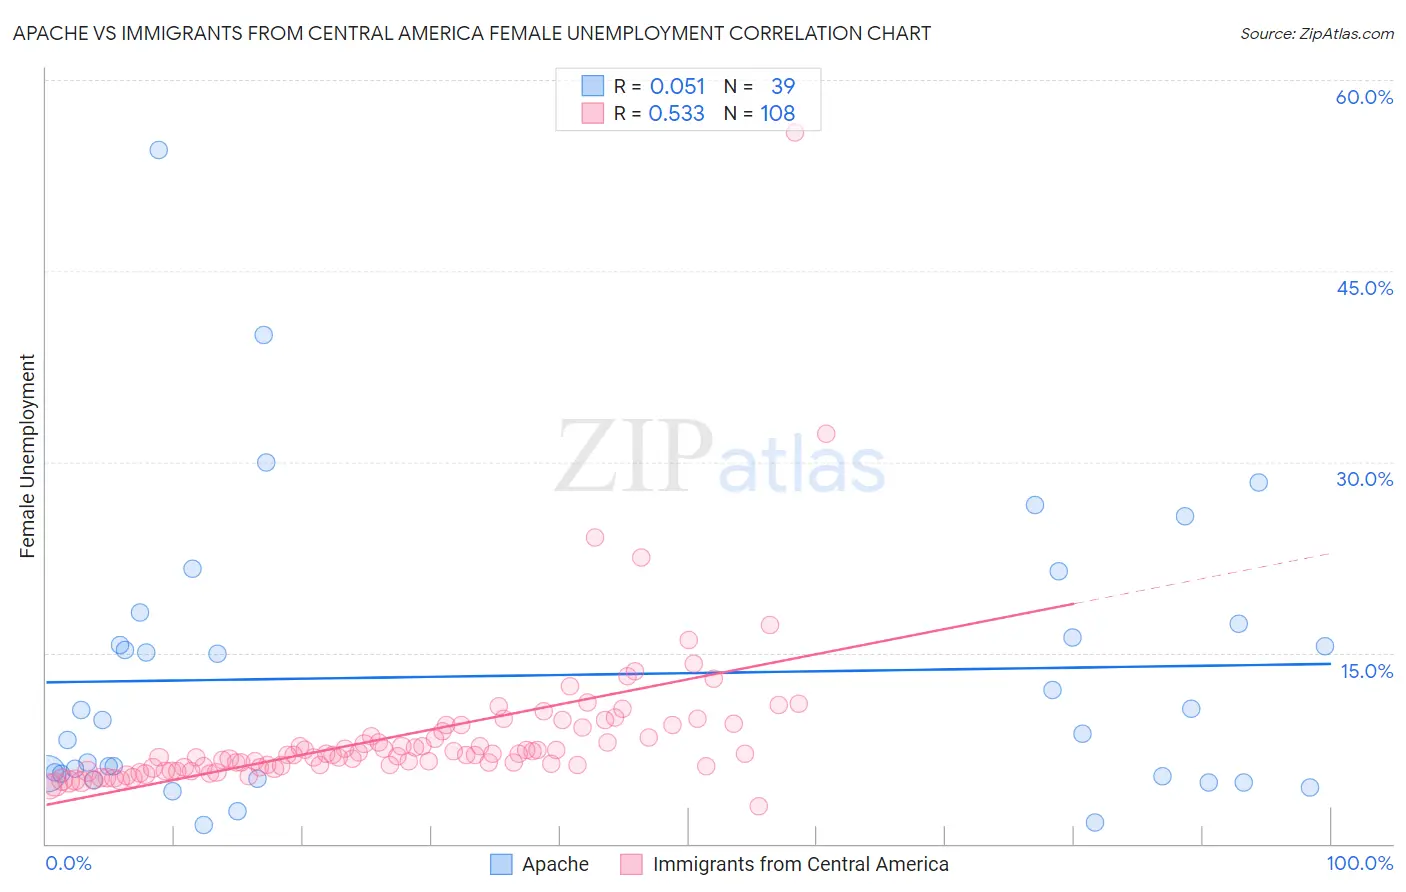 Apache vs Immigrants from Central America Female Unemployment